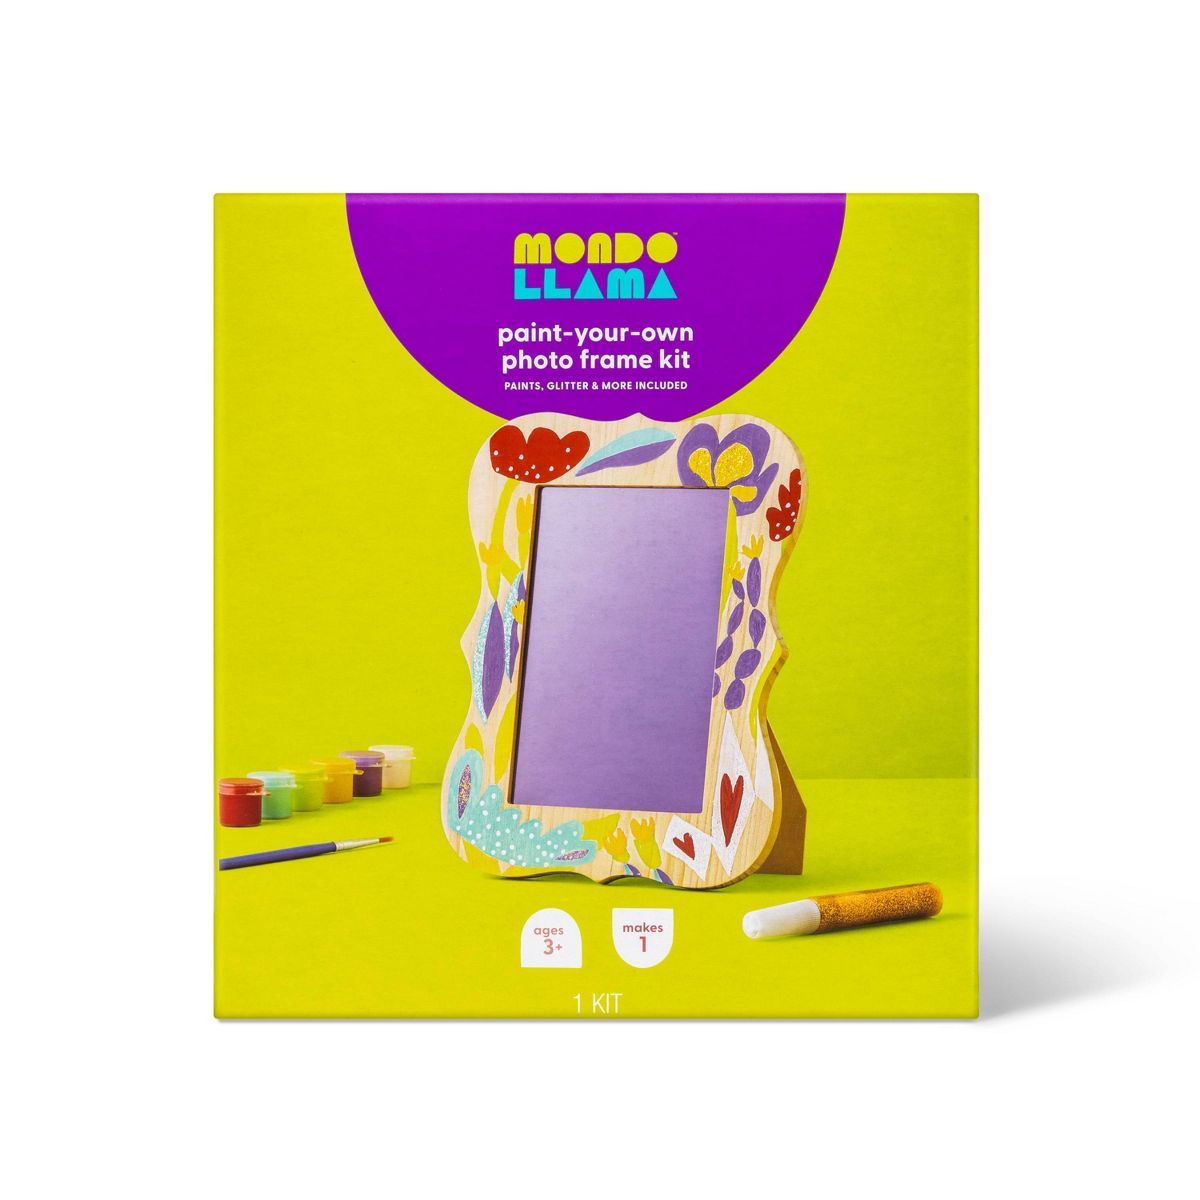 Make-Your-Own Frame Mother/Father Day Craft Kit - Mondo Llama™ | Target